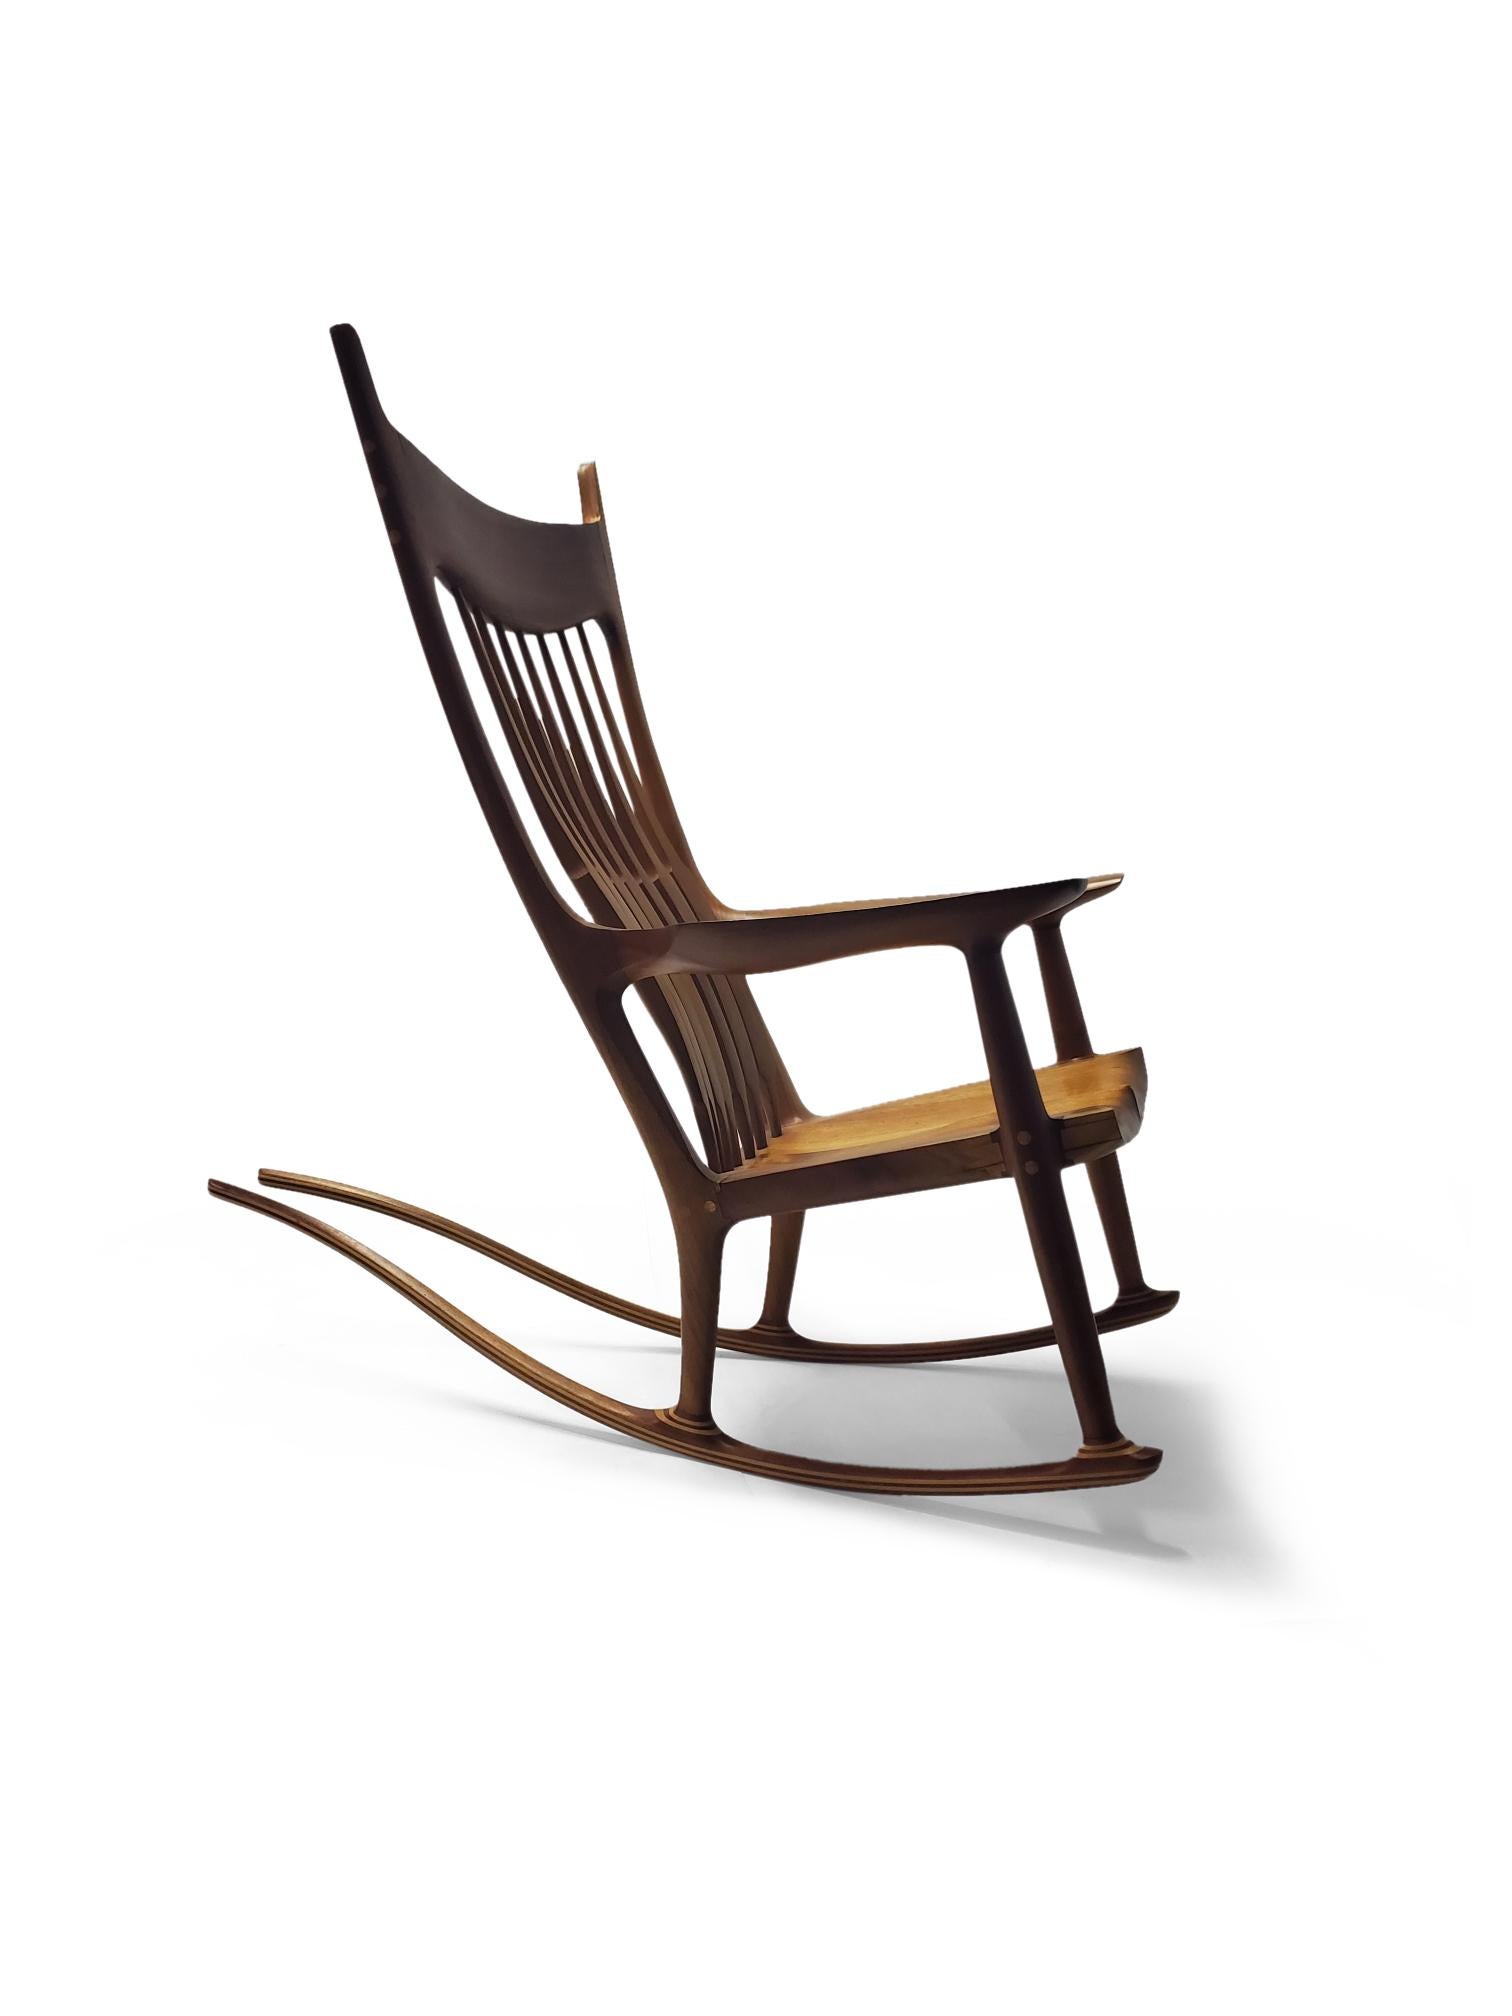 Wood Vintage Sam Maloof Style Rocking Chair  For Sale